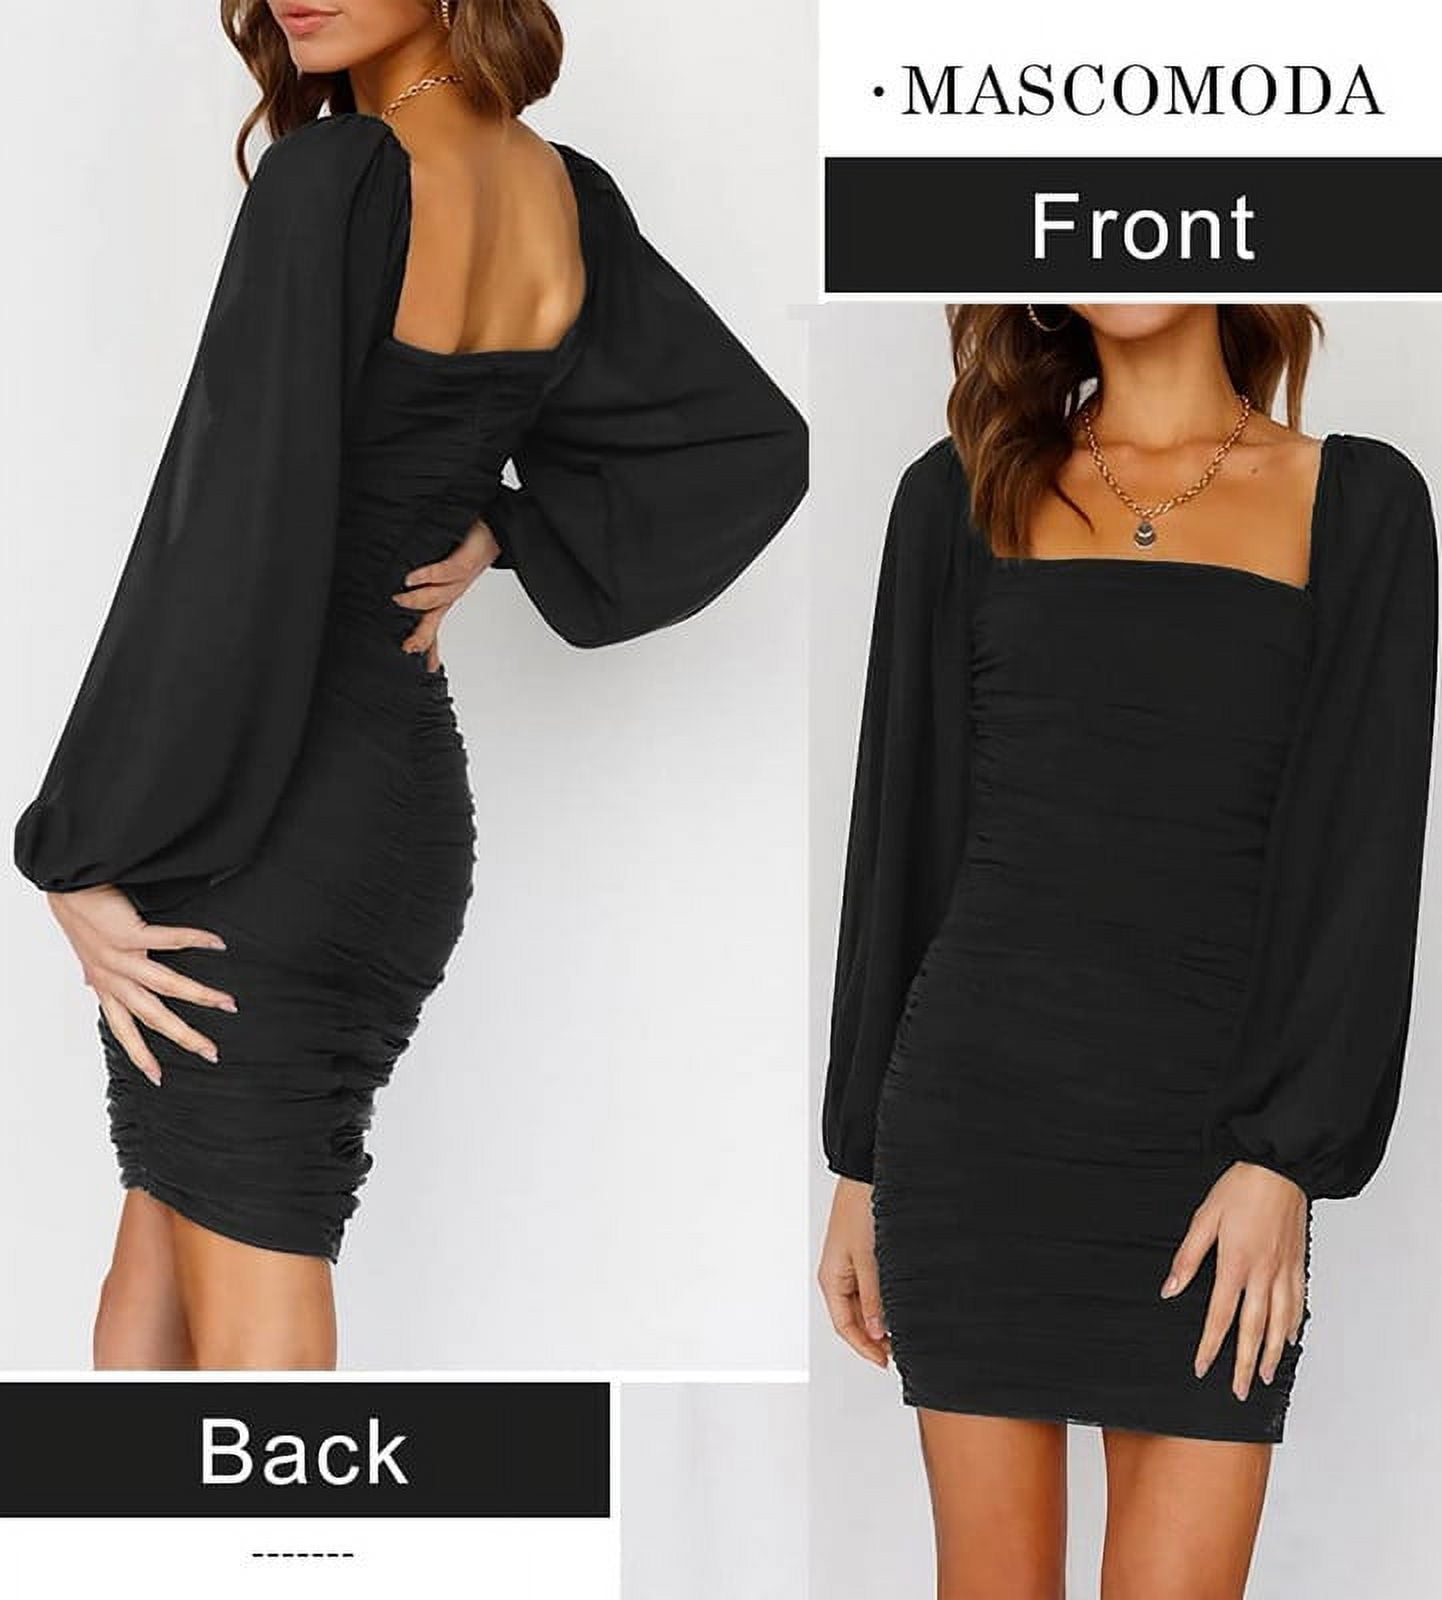 SASIMIC Women's Long Sleeve Bodycon Square Neck Sexy Party Long